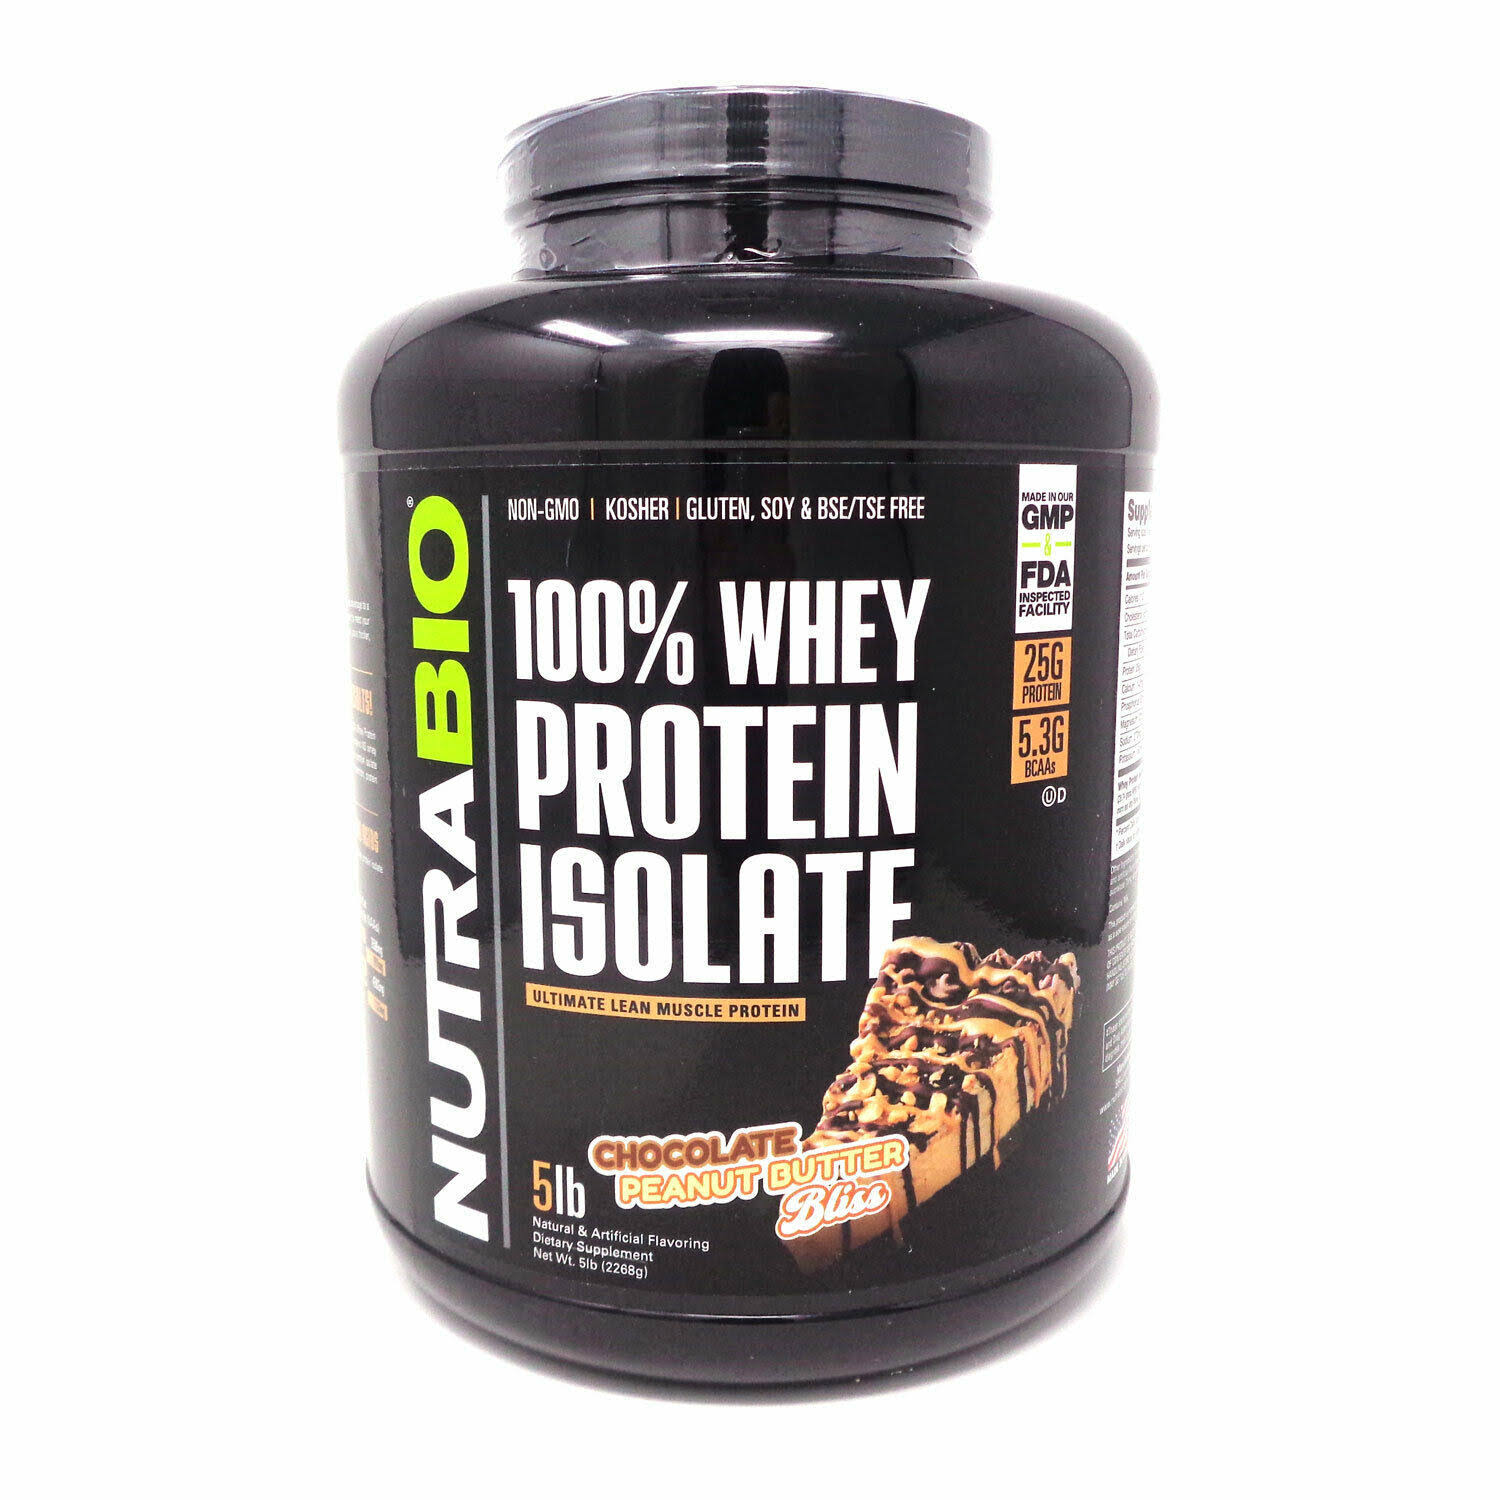 NutraBio Whey Protein Isolate 5 lbs - Chocolate Peanut Butter Bliss